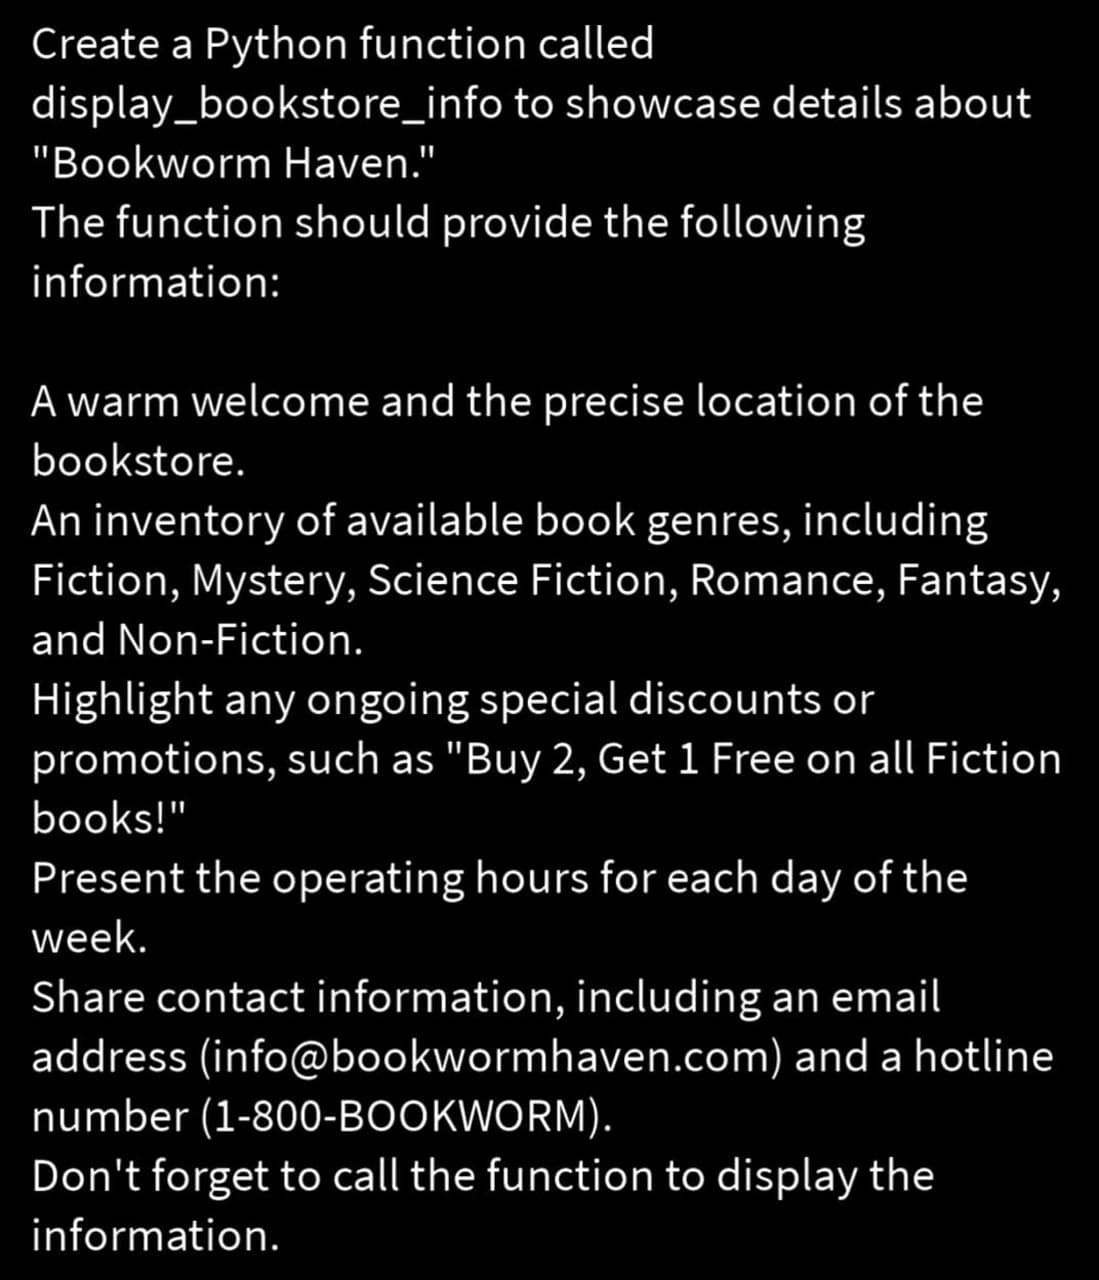 Create a Python function called
display_bookstore_info
to showcase details about
"Bookworm Haven."
The function should provide the following
information:
A warm welcome and the precise location of the
bookstore.
An inventory of available book genres, including
Fiction, Mystery, Science Fiction, Romance, Fantasy,
and Non-Fiction.
Highlight any ongoing special discounts or
promotions, such as "Buy 2, Get 1 Free on all Fiction
books!"
Present the operating hours for each day of the
week.
Share contact information, including an email
address (info@bookwormhaven.com) and a hotline
number (1-800-BOOKWORM).
Don't forget to call the function to display the
information.